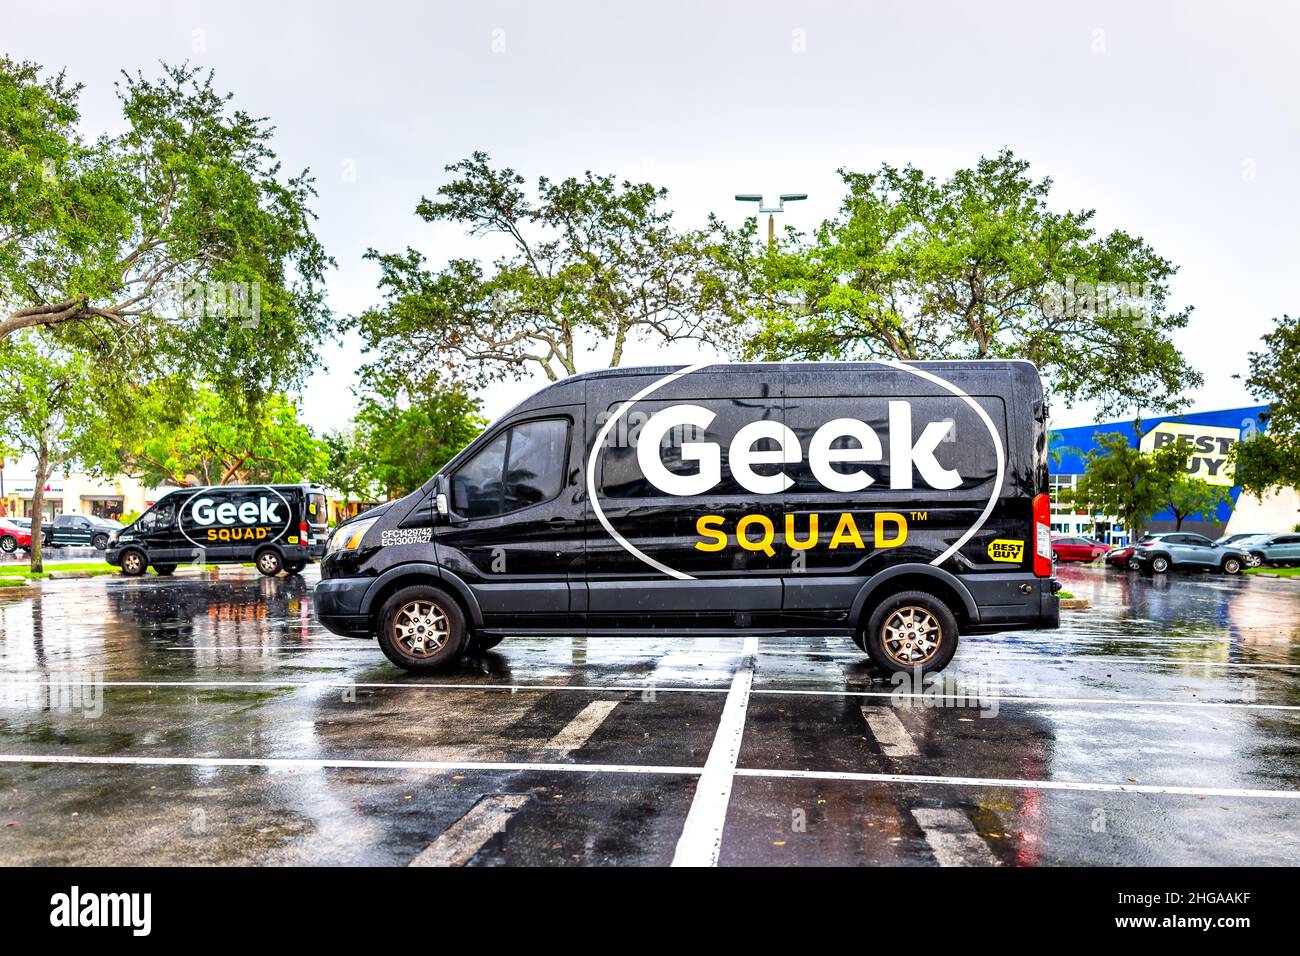 Miami, USA - July 12, 2021: Sign advertisement for Best Buy store on exterior building facade and Geek Squad repair van truck in parking lot in Florid Stock Photo